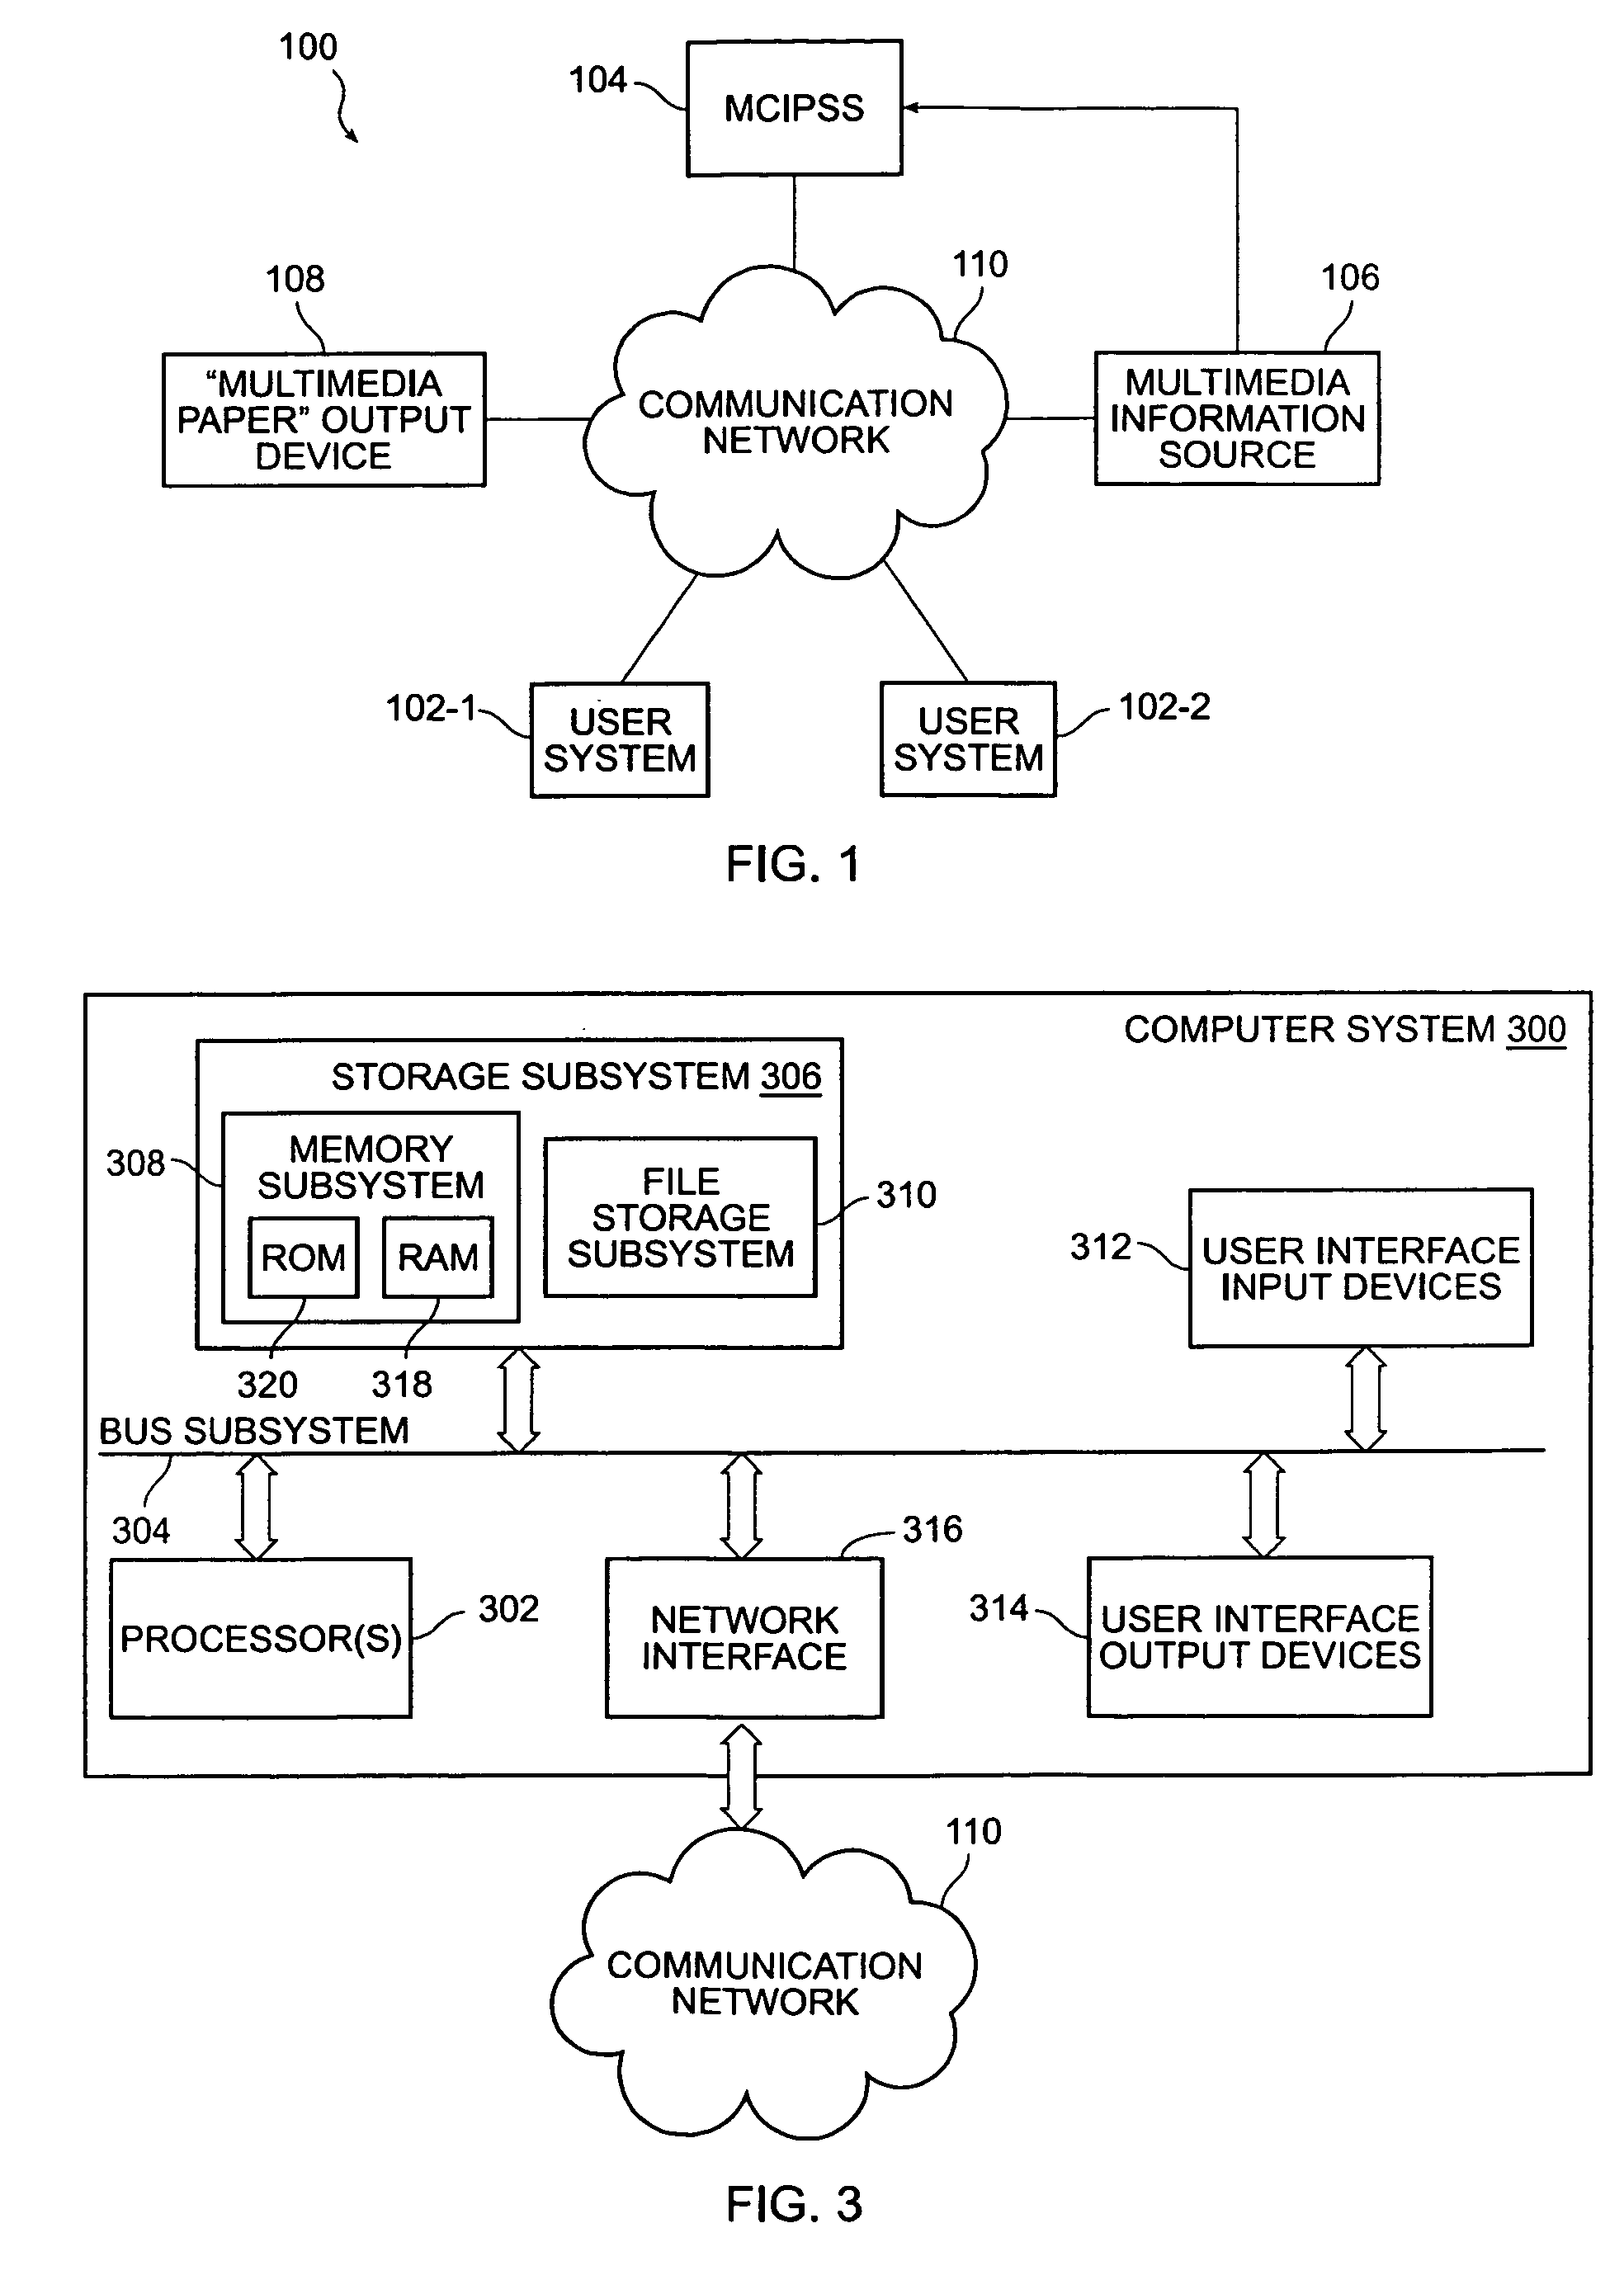 Paper-based interface for multimedia information stored by multiple multimedia documents